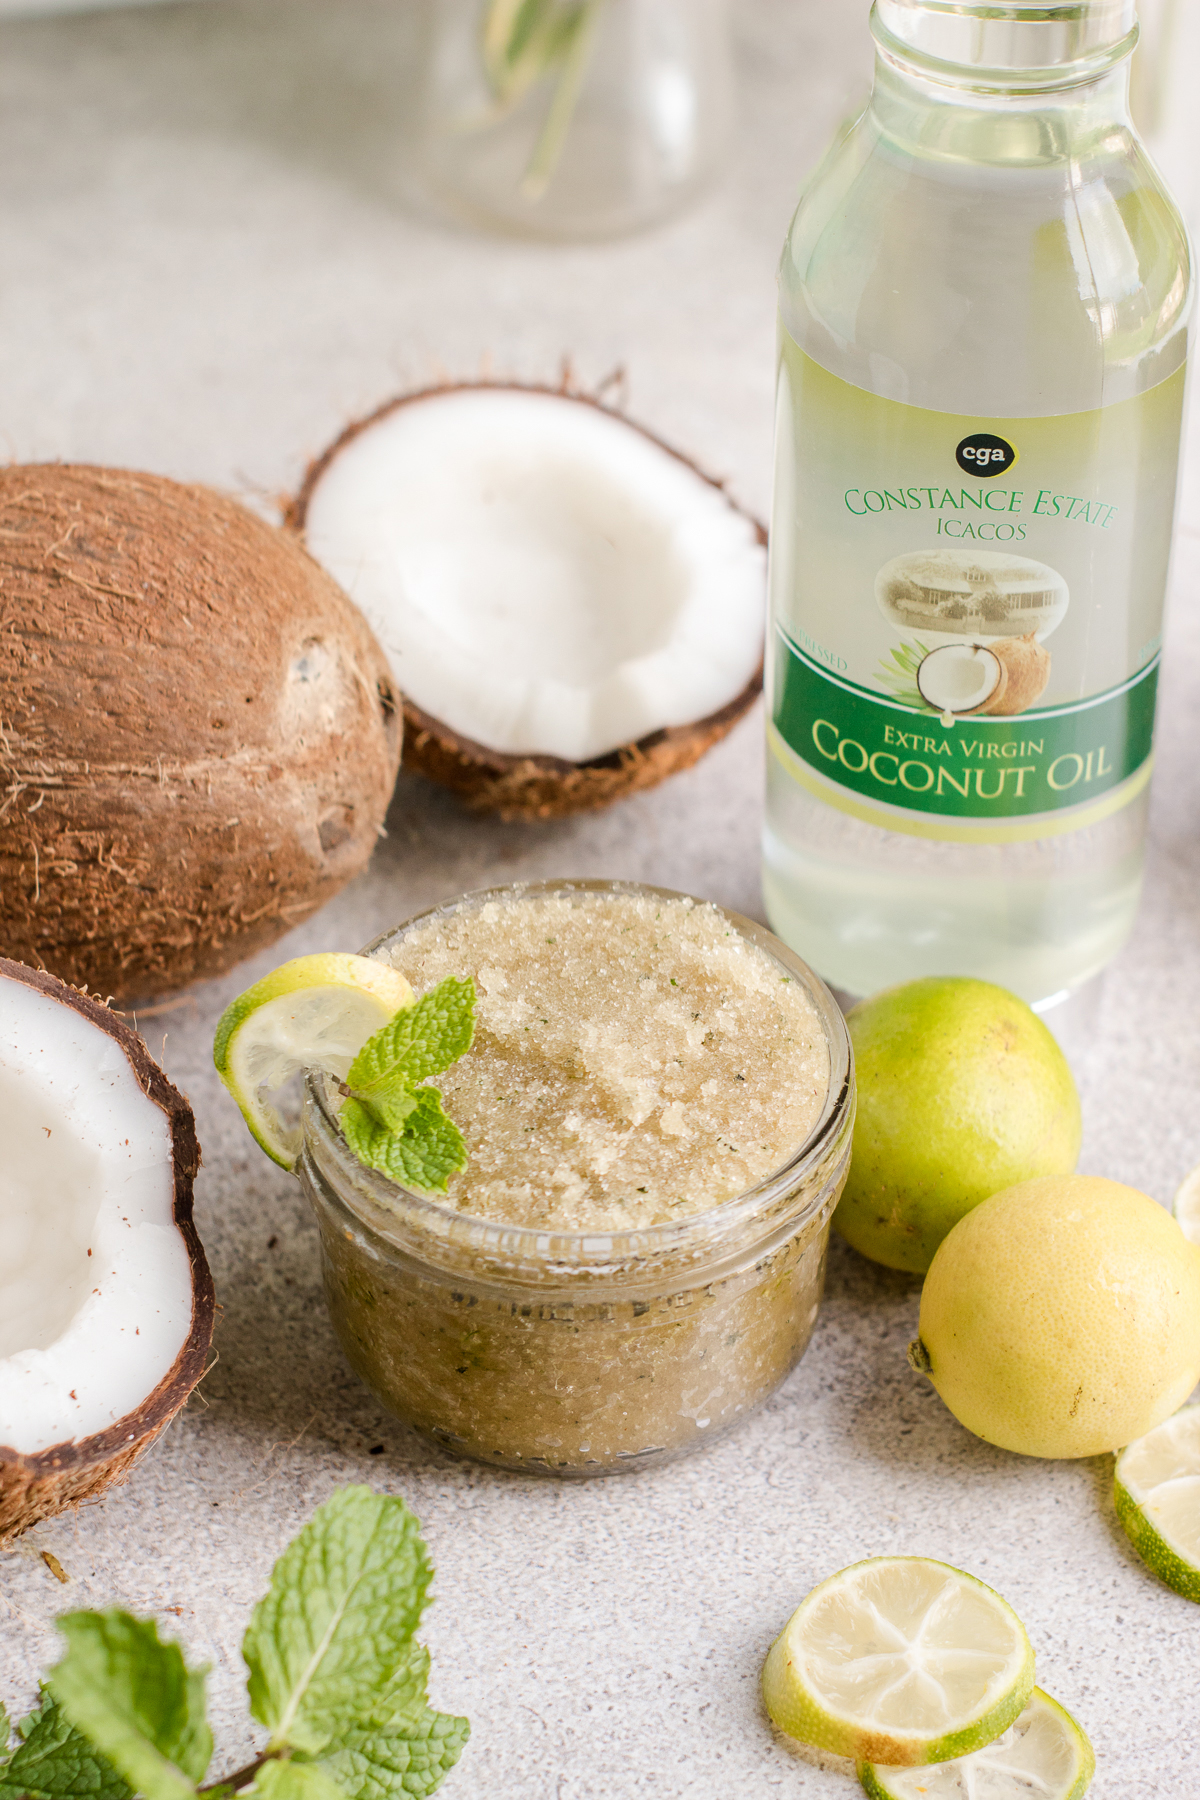 How to Make a Sugar Body Scrub with Coconut Oil